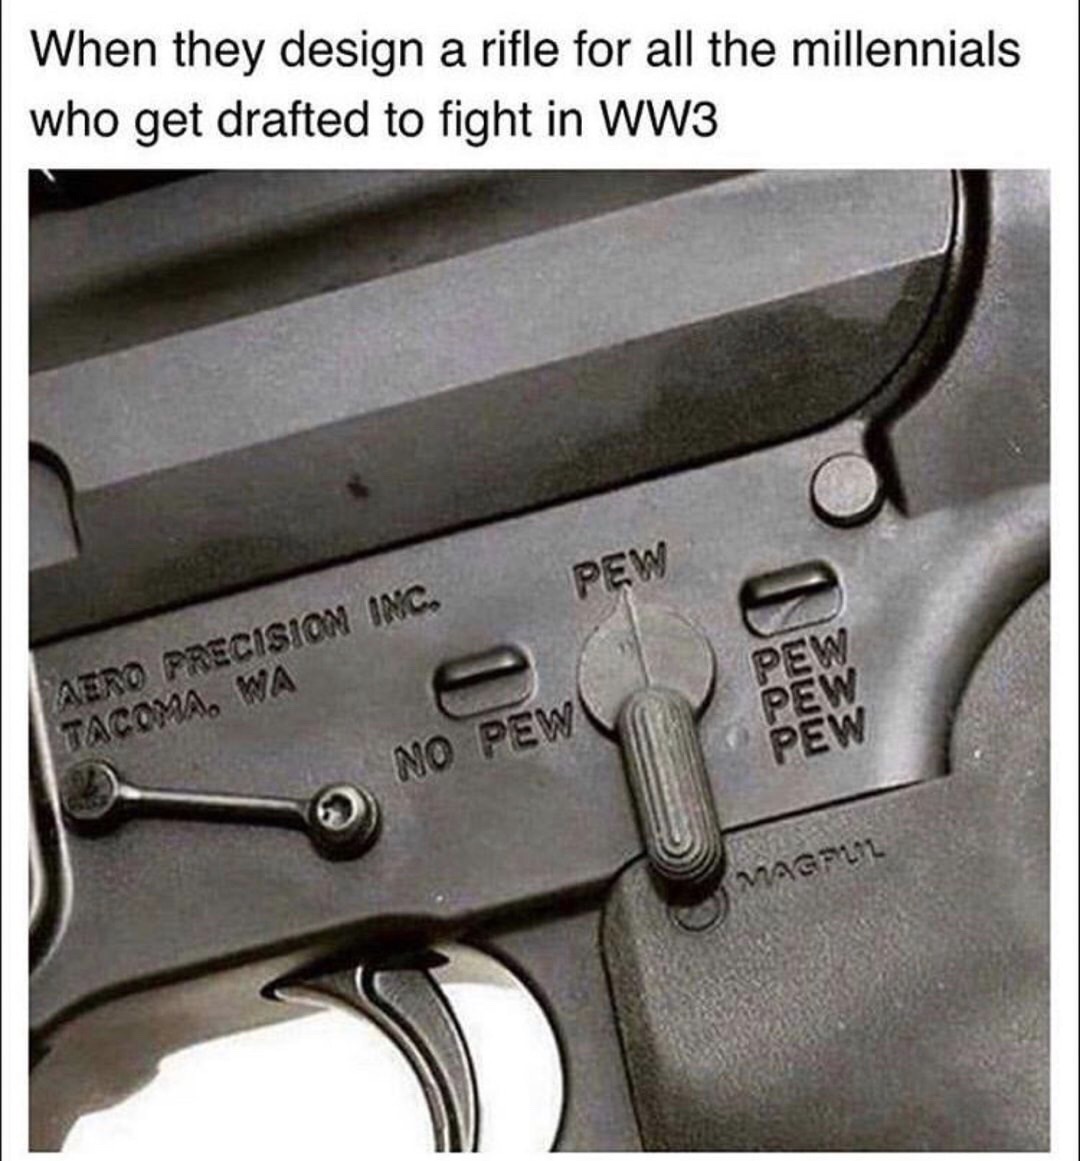 pew no pew pew pew pew - When they design a rifle for all the millennials who get drafted to fight in WW3 Pew Aero Precision Inc. Tacoma, Wa Pew Pew Pew No Pew